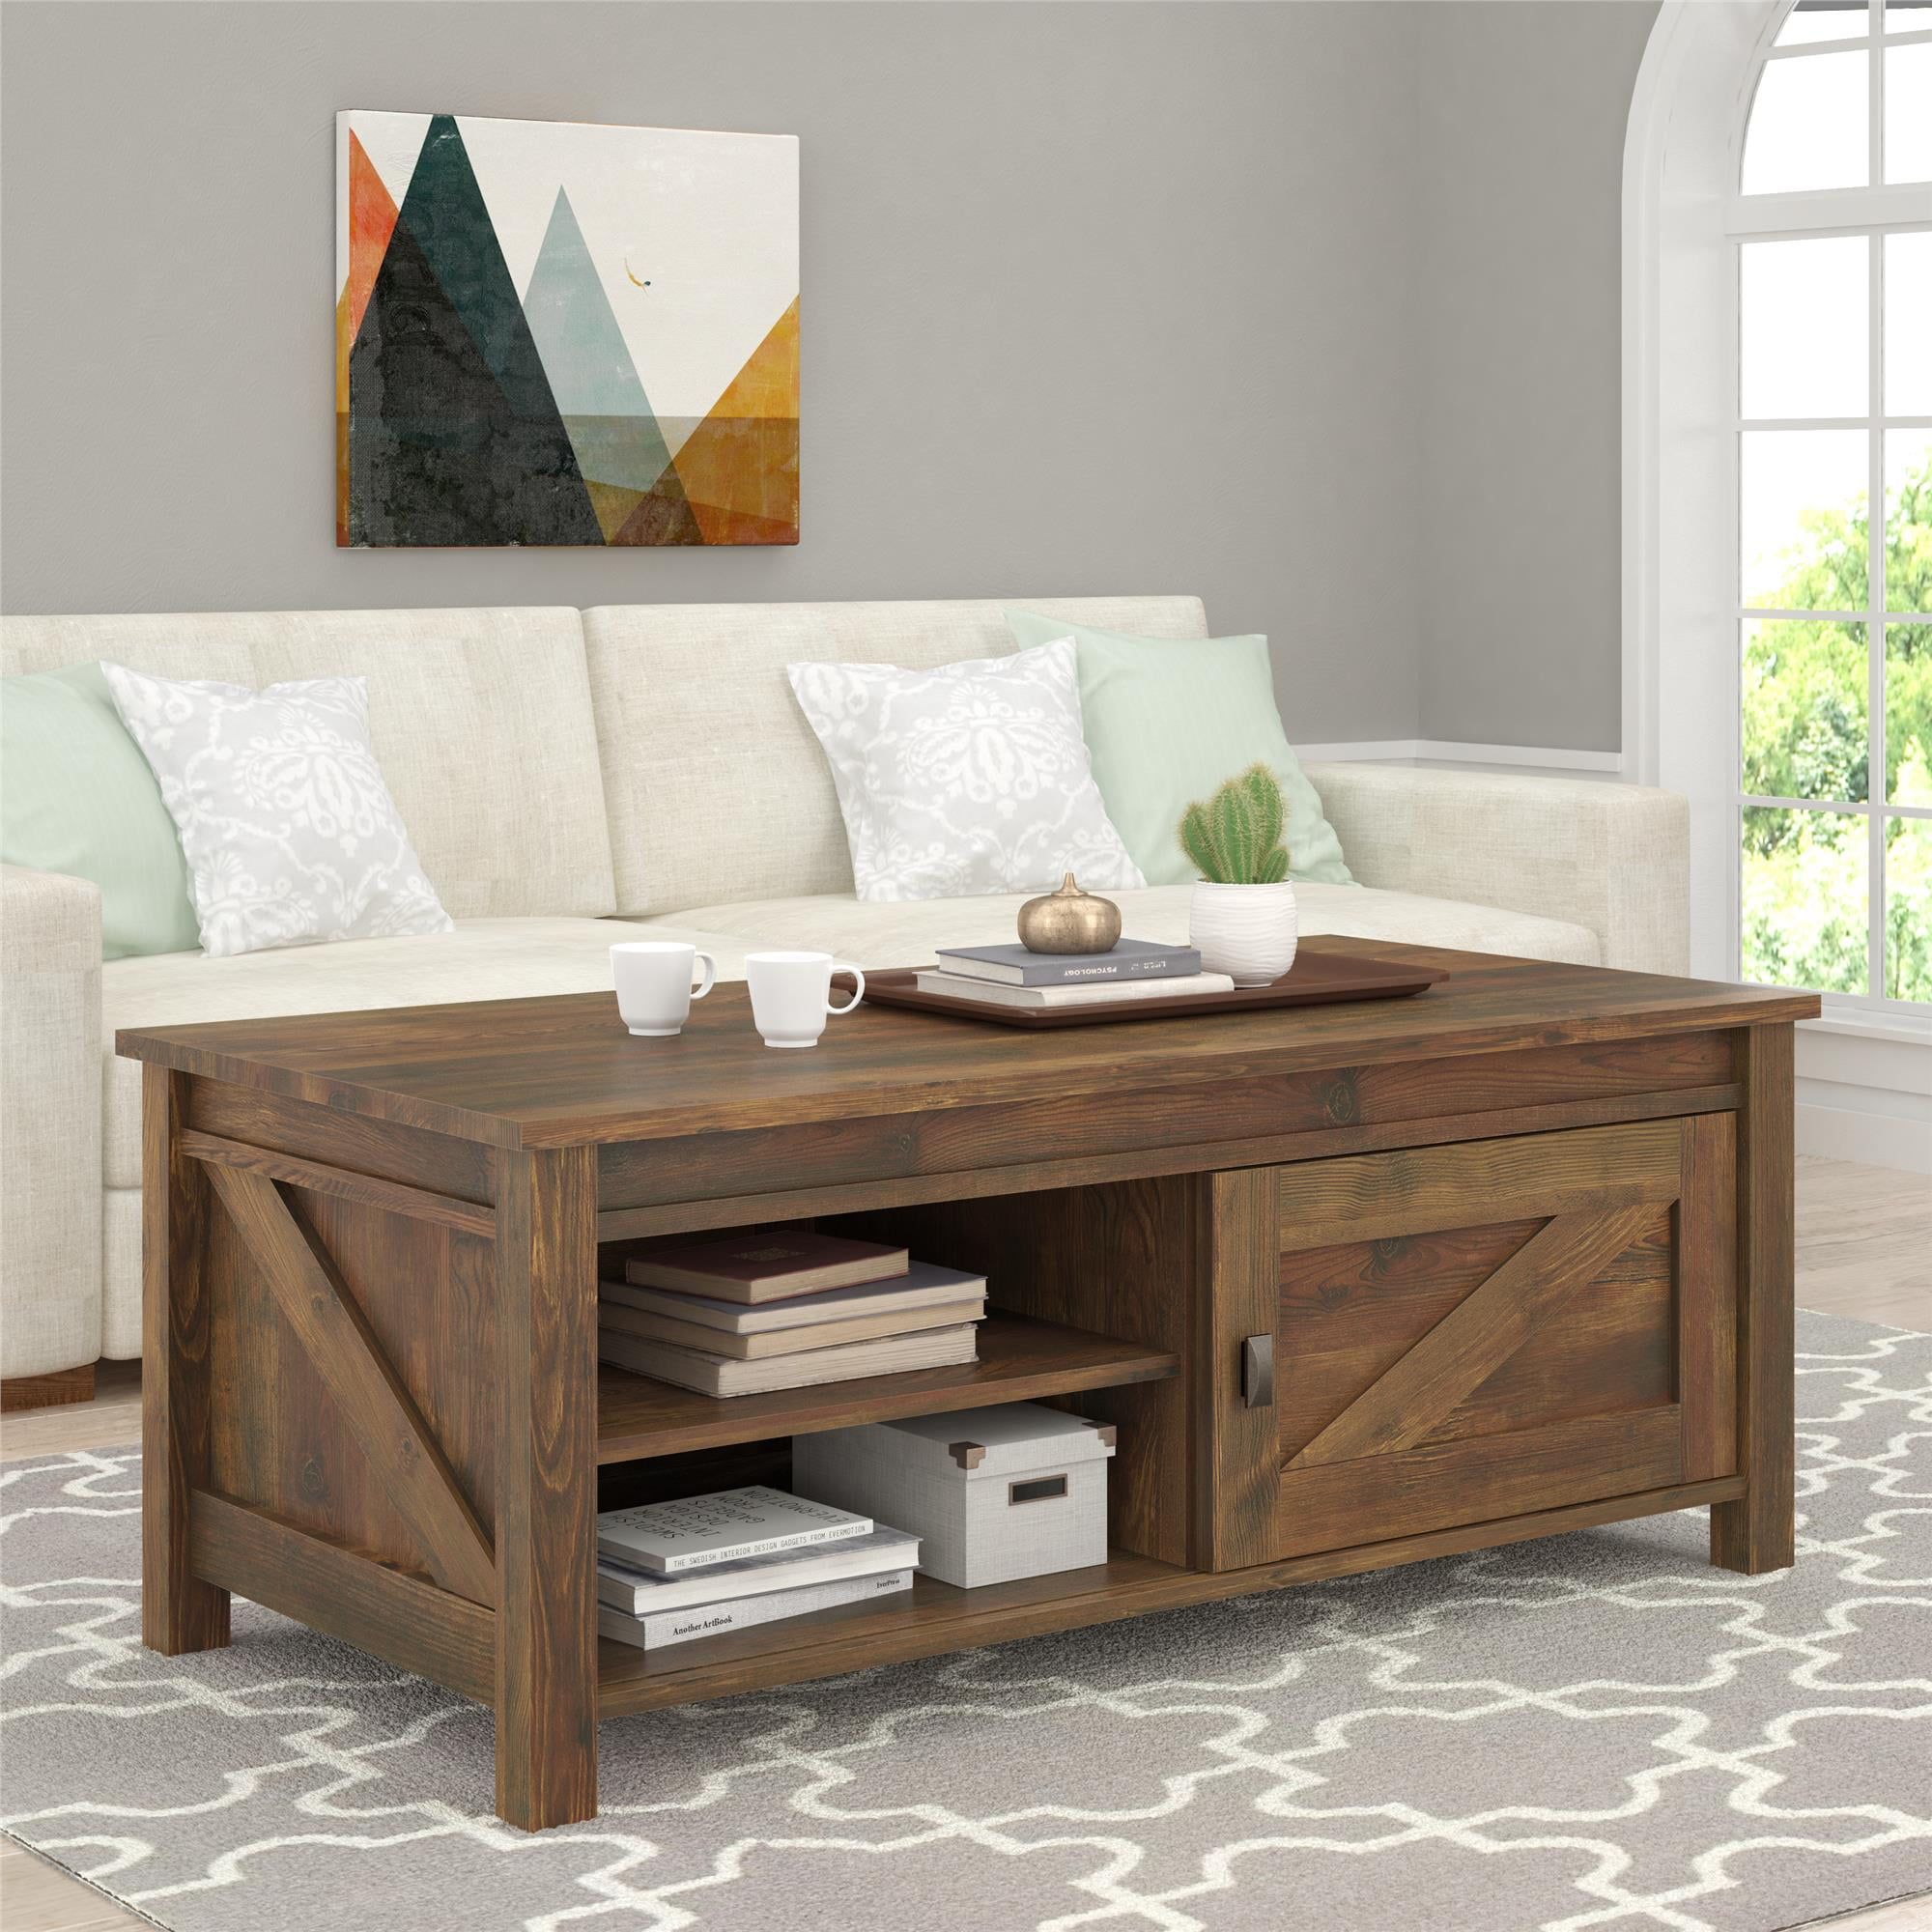 Ameriwood Home Farmington Coffee Table, Rustic – Walmart Throughout Rustic Coffee Tables (View 6 of 20)